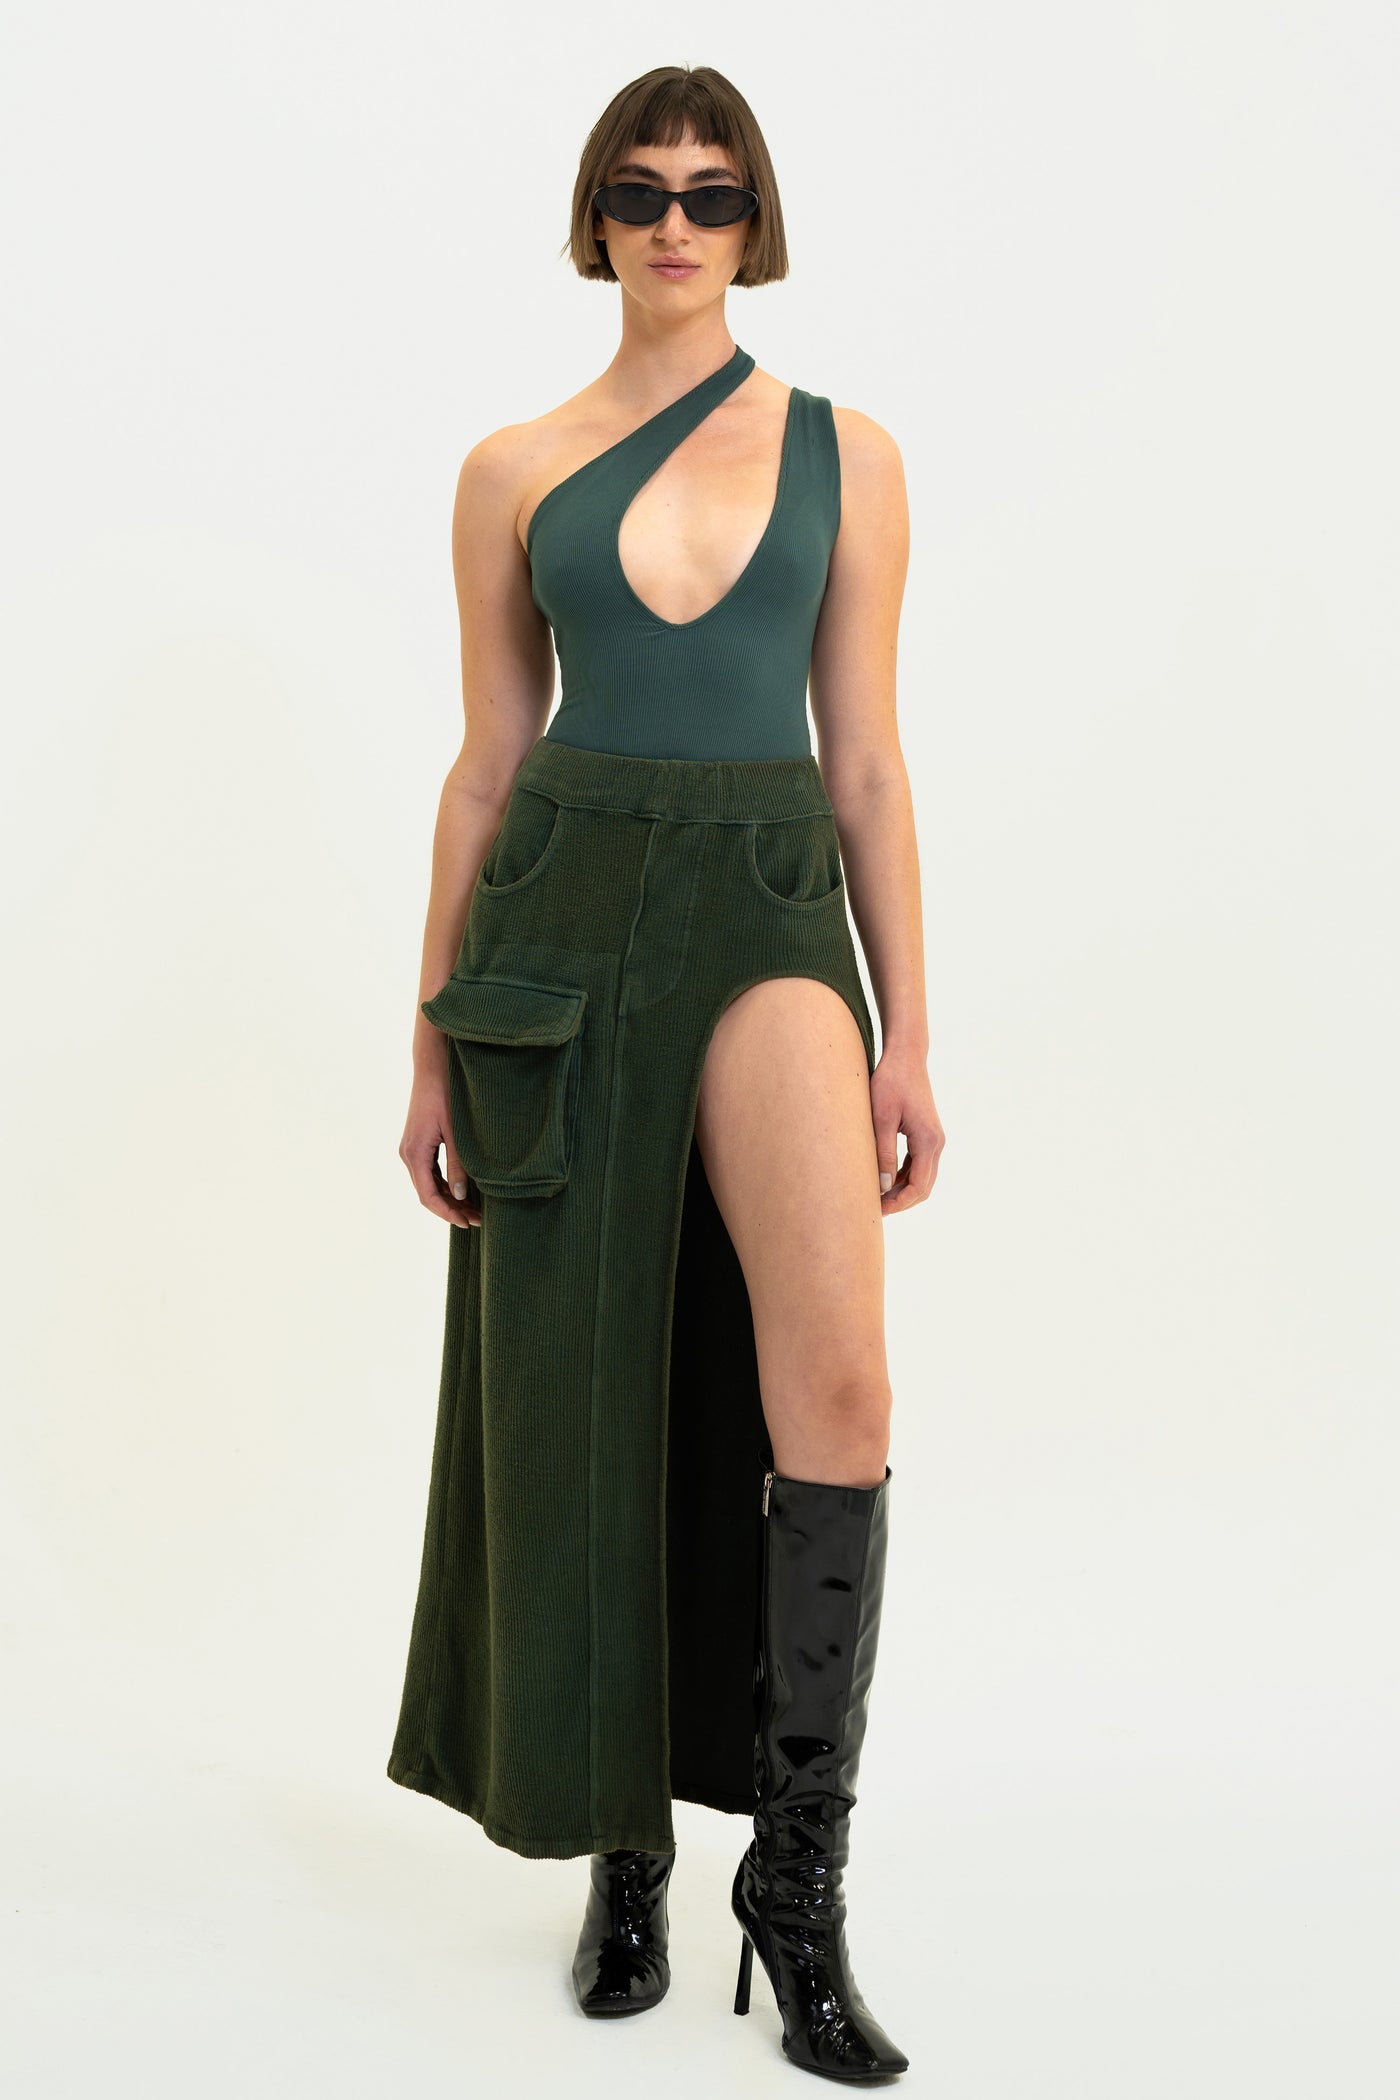 Olive Aspen Cargo Skirt with stylish cargo pocket, high leg slit, made from luxurious corded terry.